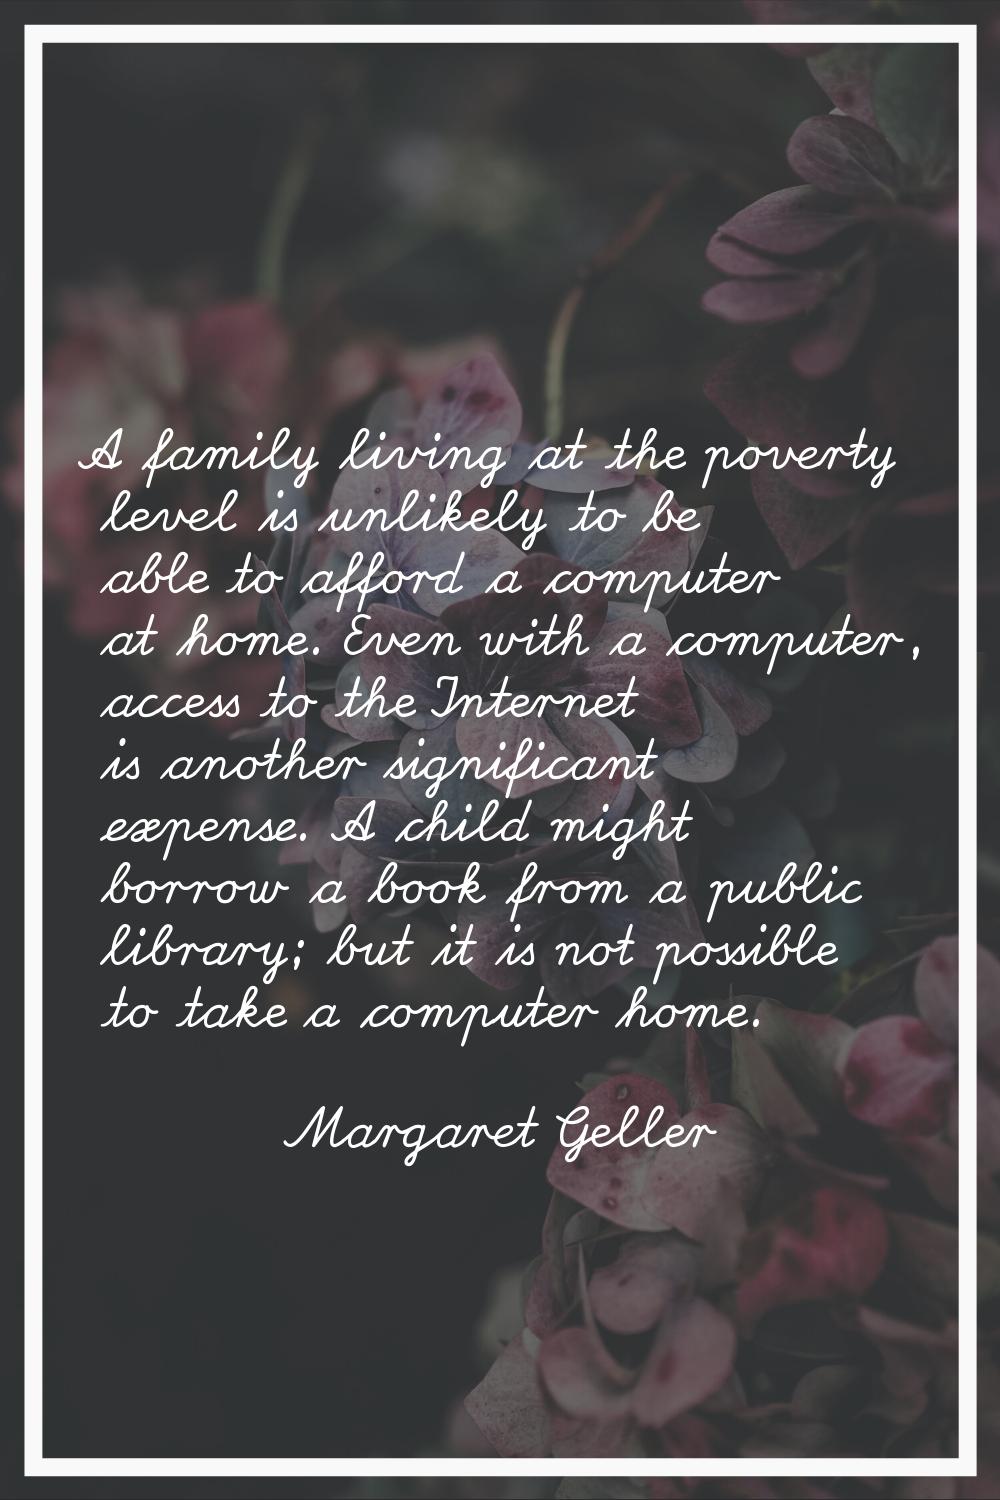 A family living at the poverty level is unlikely to be able to afford a computer at home. Even with